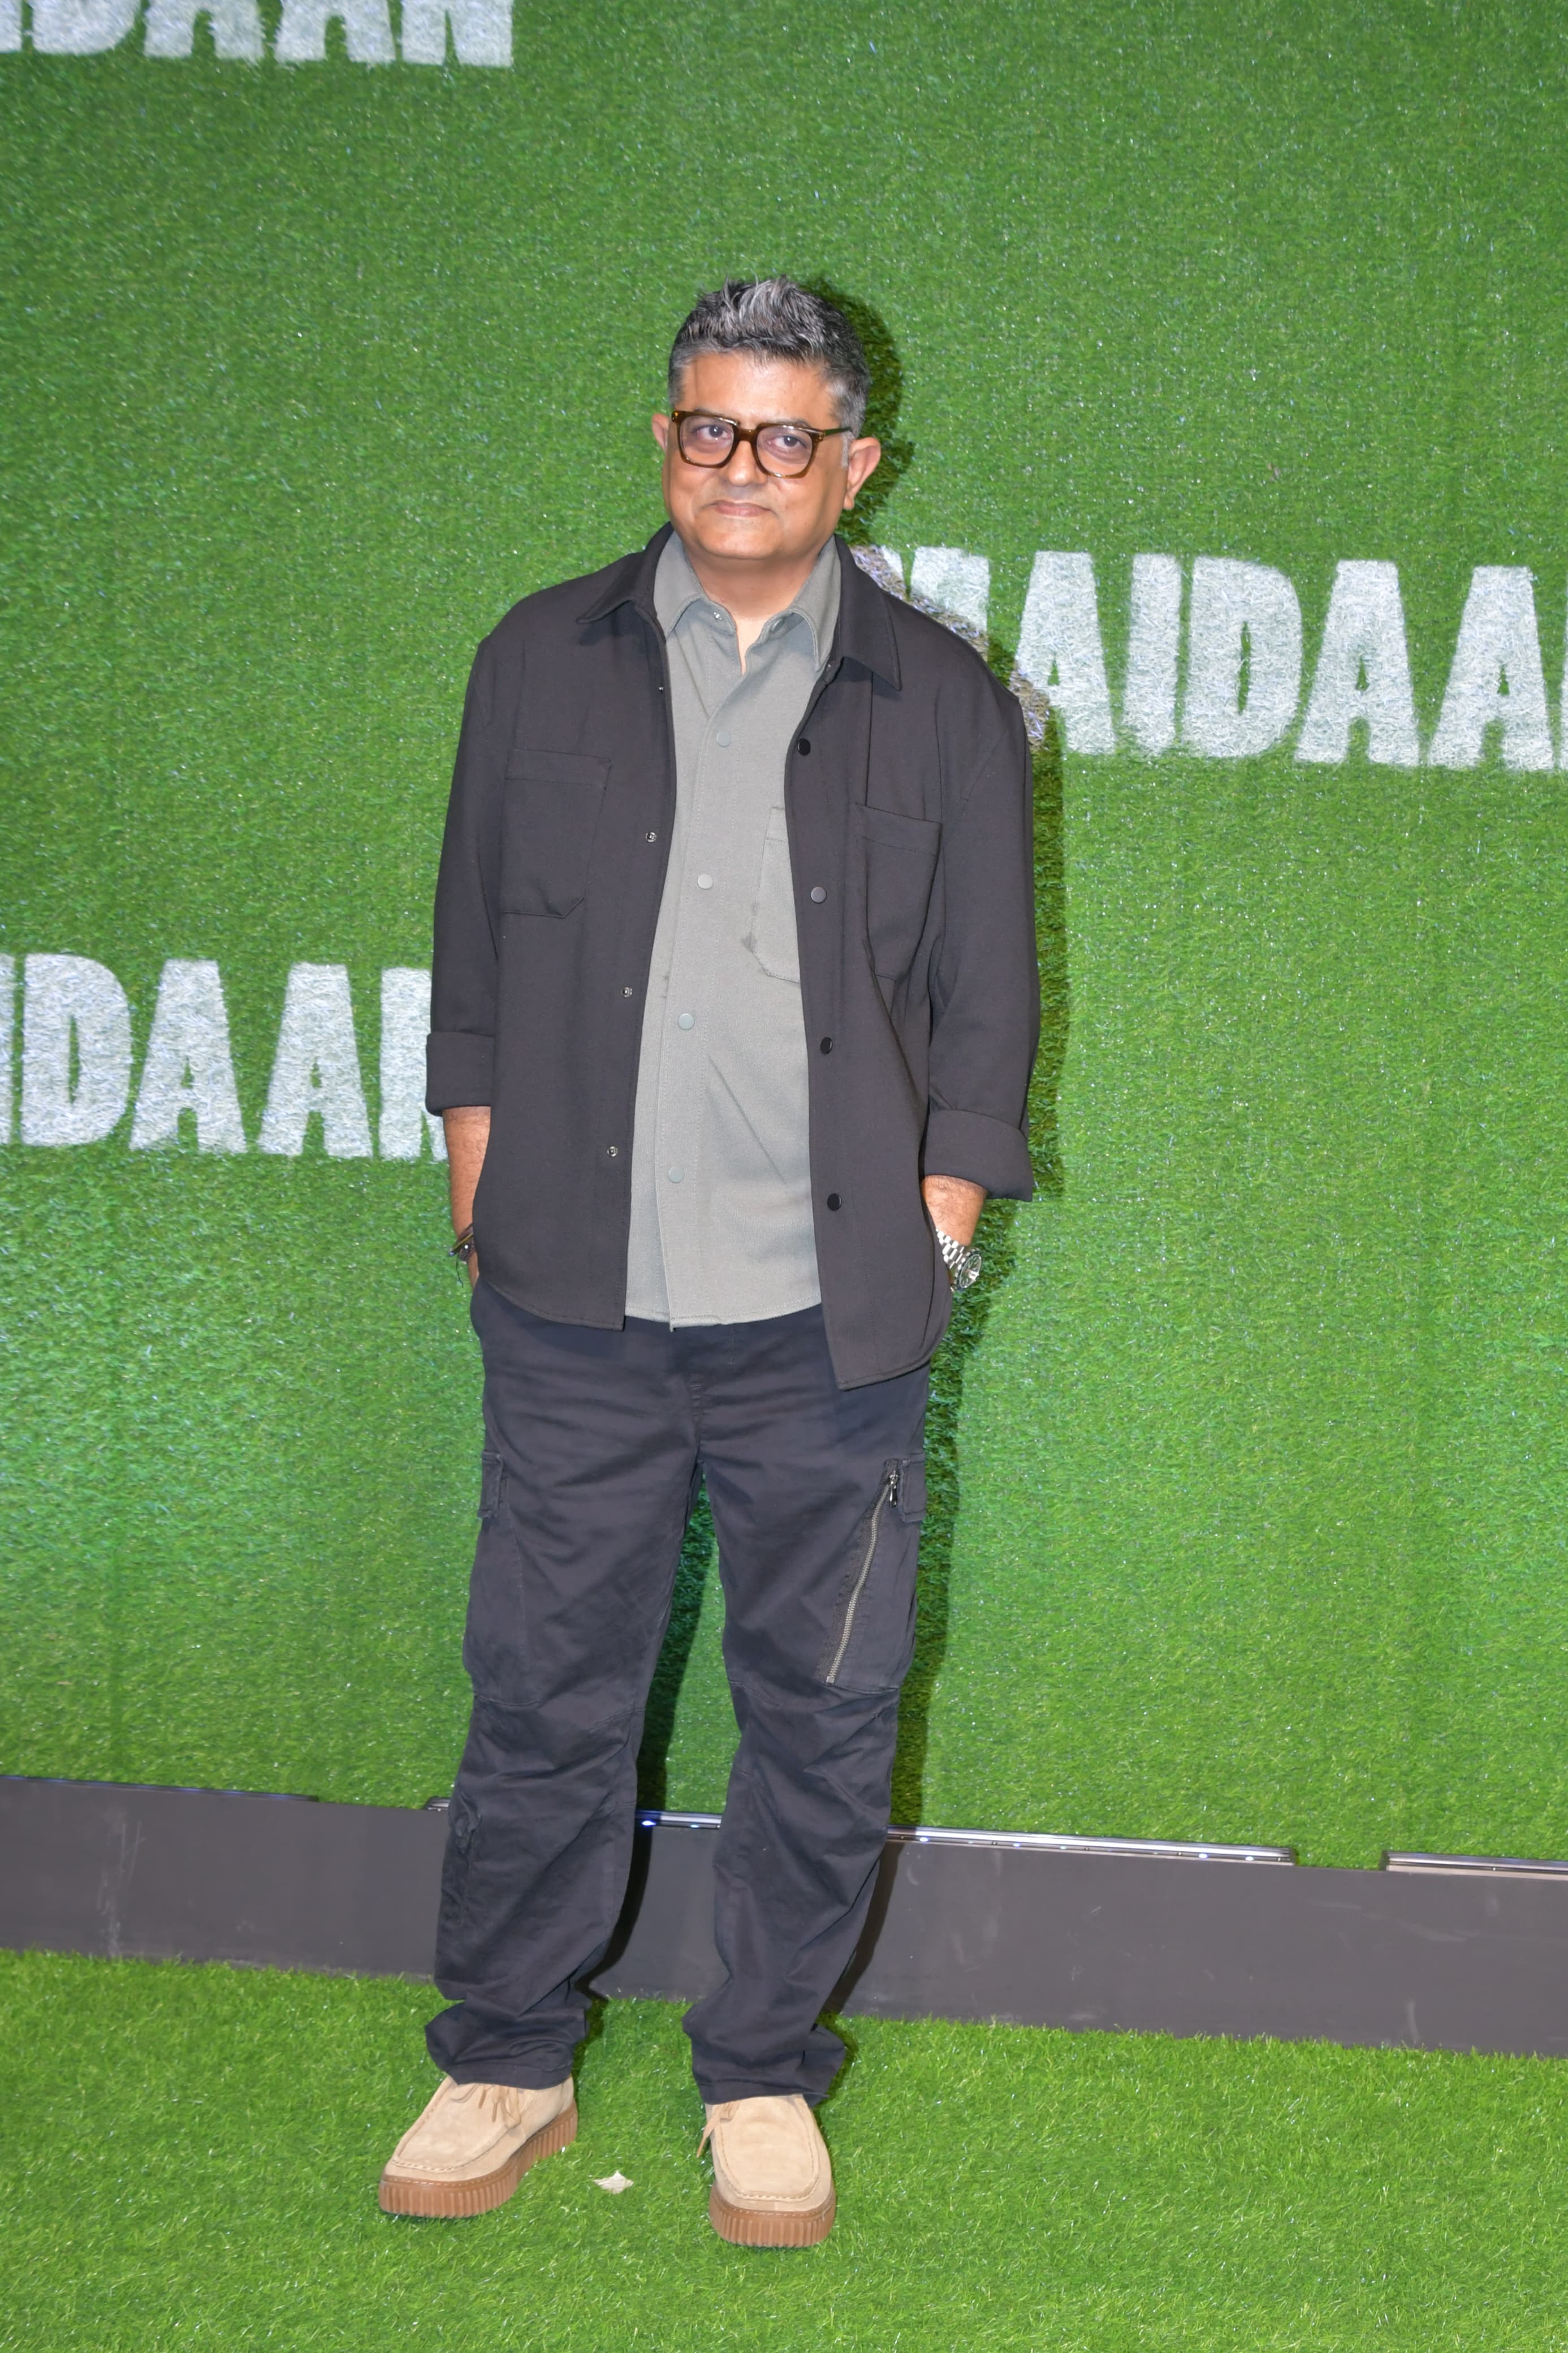 Gajraj Rao, who plays a significant role in the film, was also present at the star-studded screening